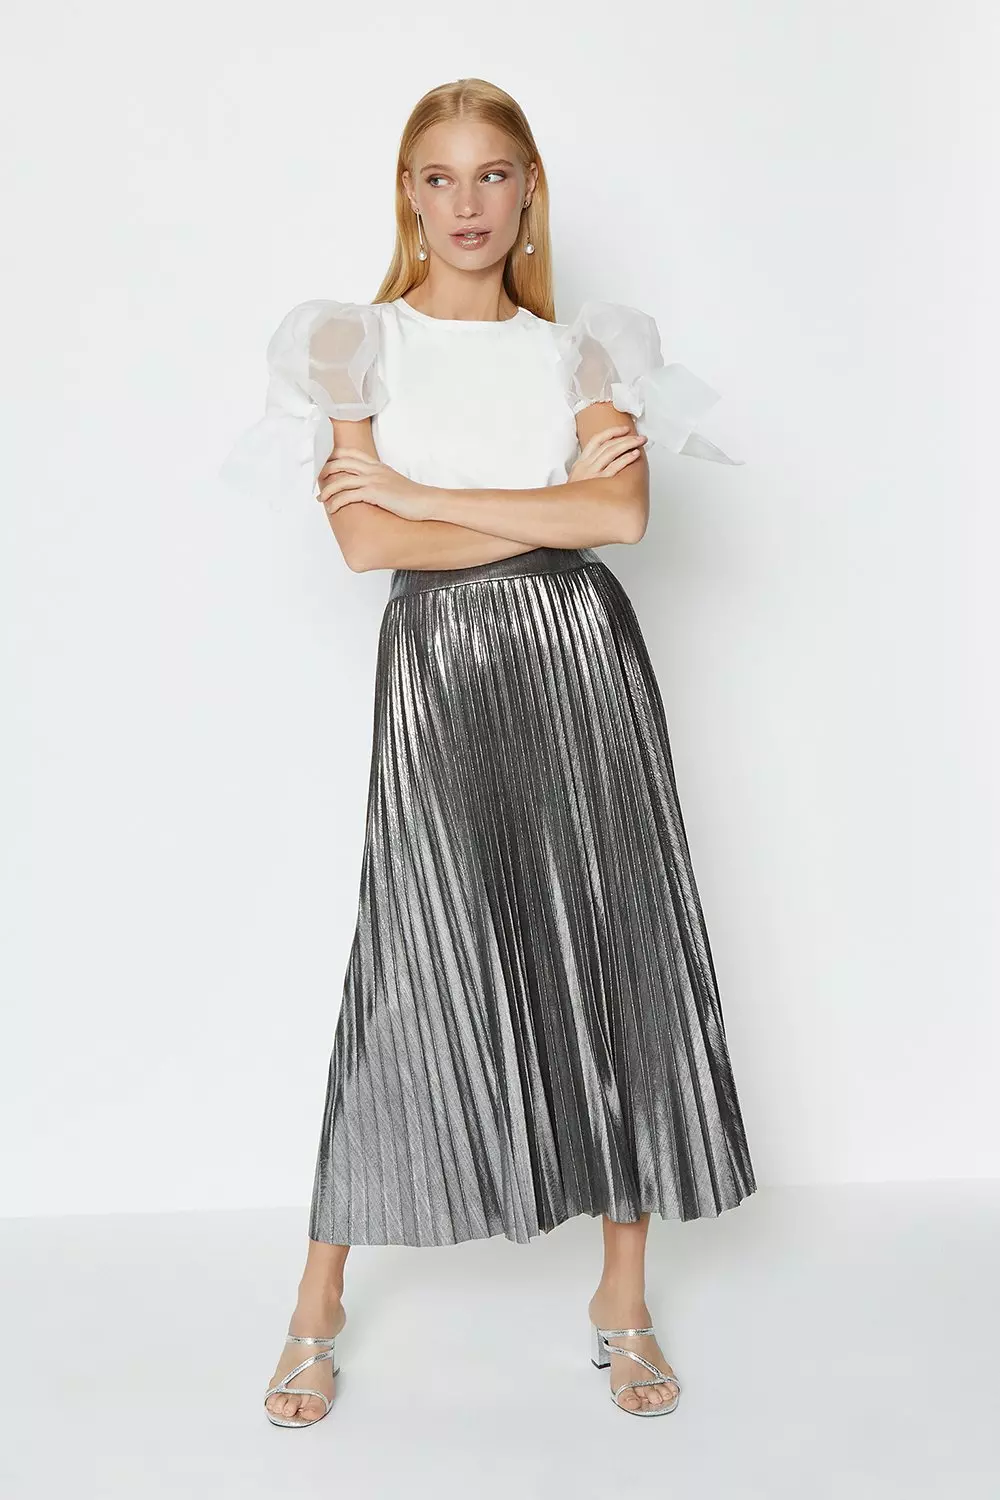 Topshop Faux Leather Pleated Midi Skirt In Silver | annadesignstuff.com